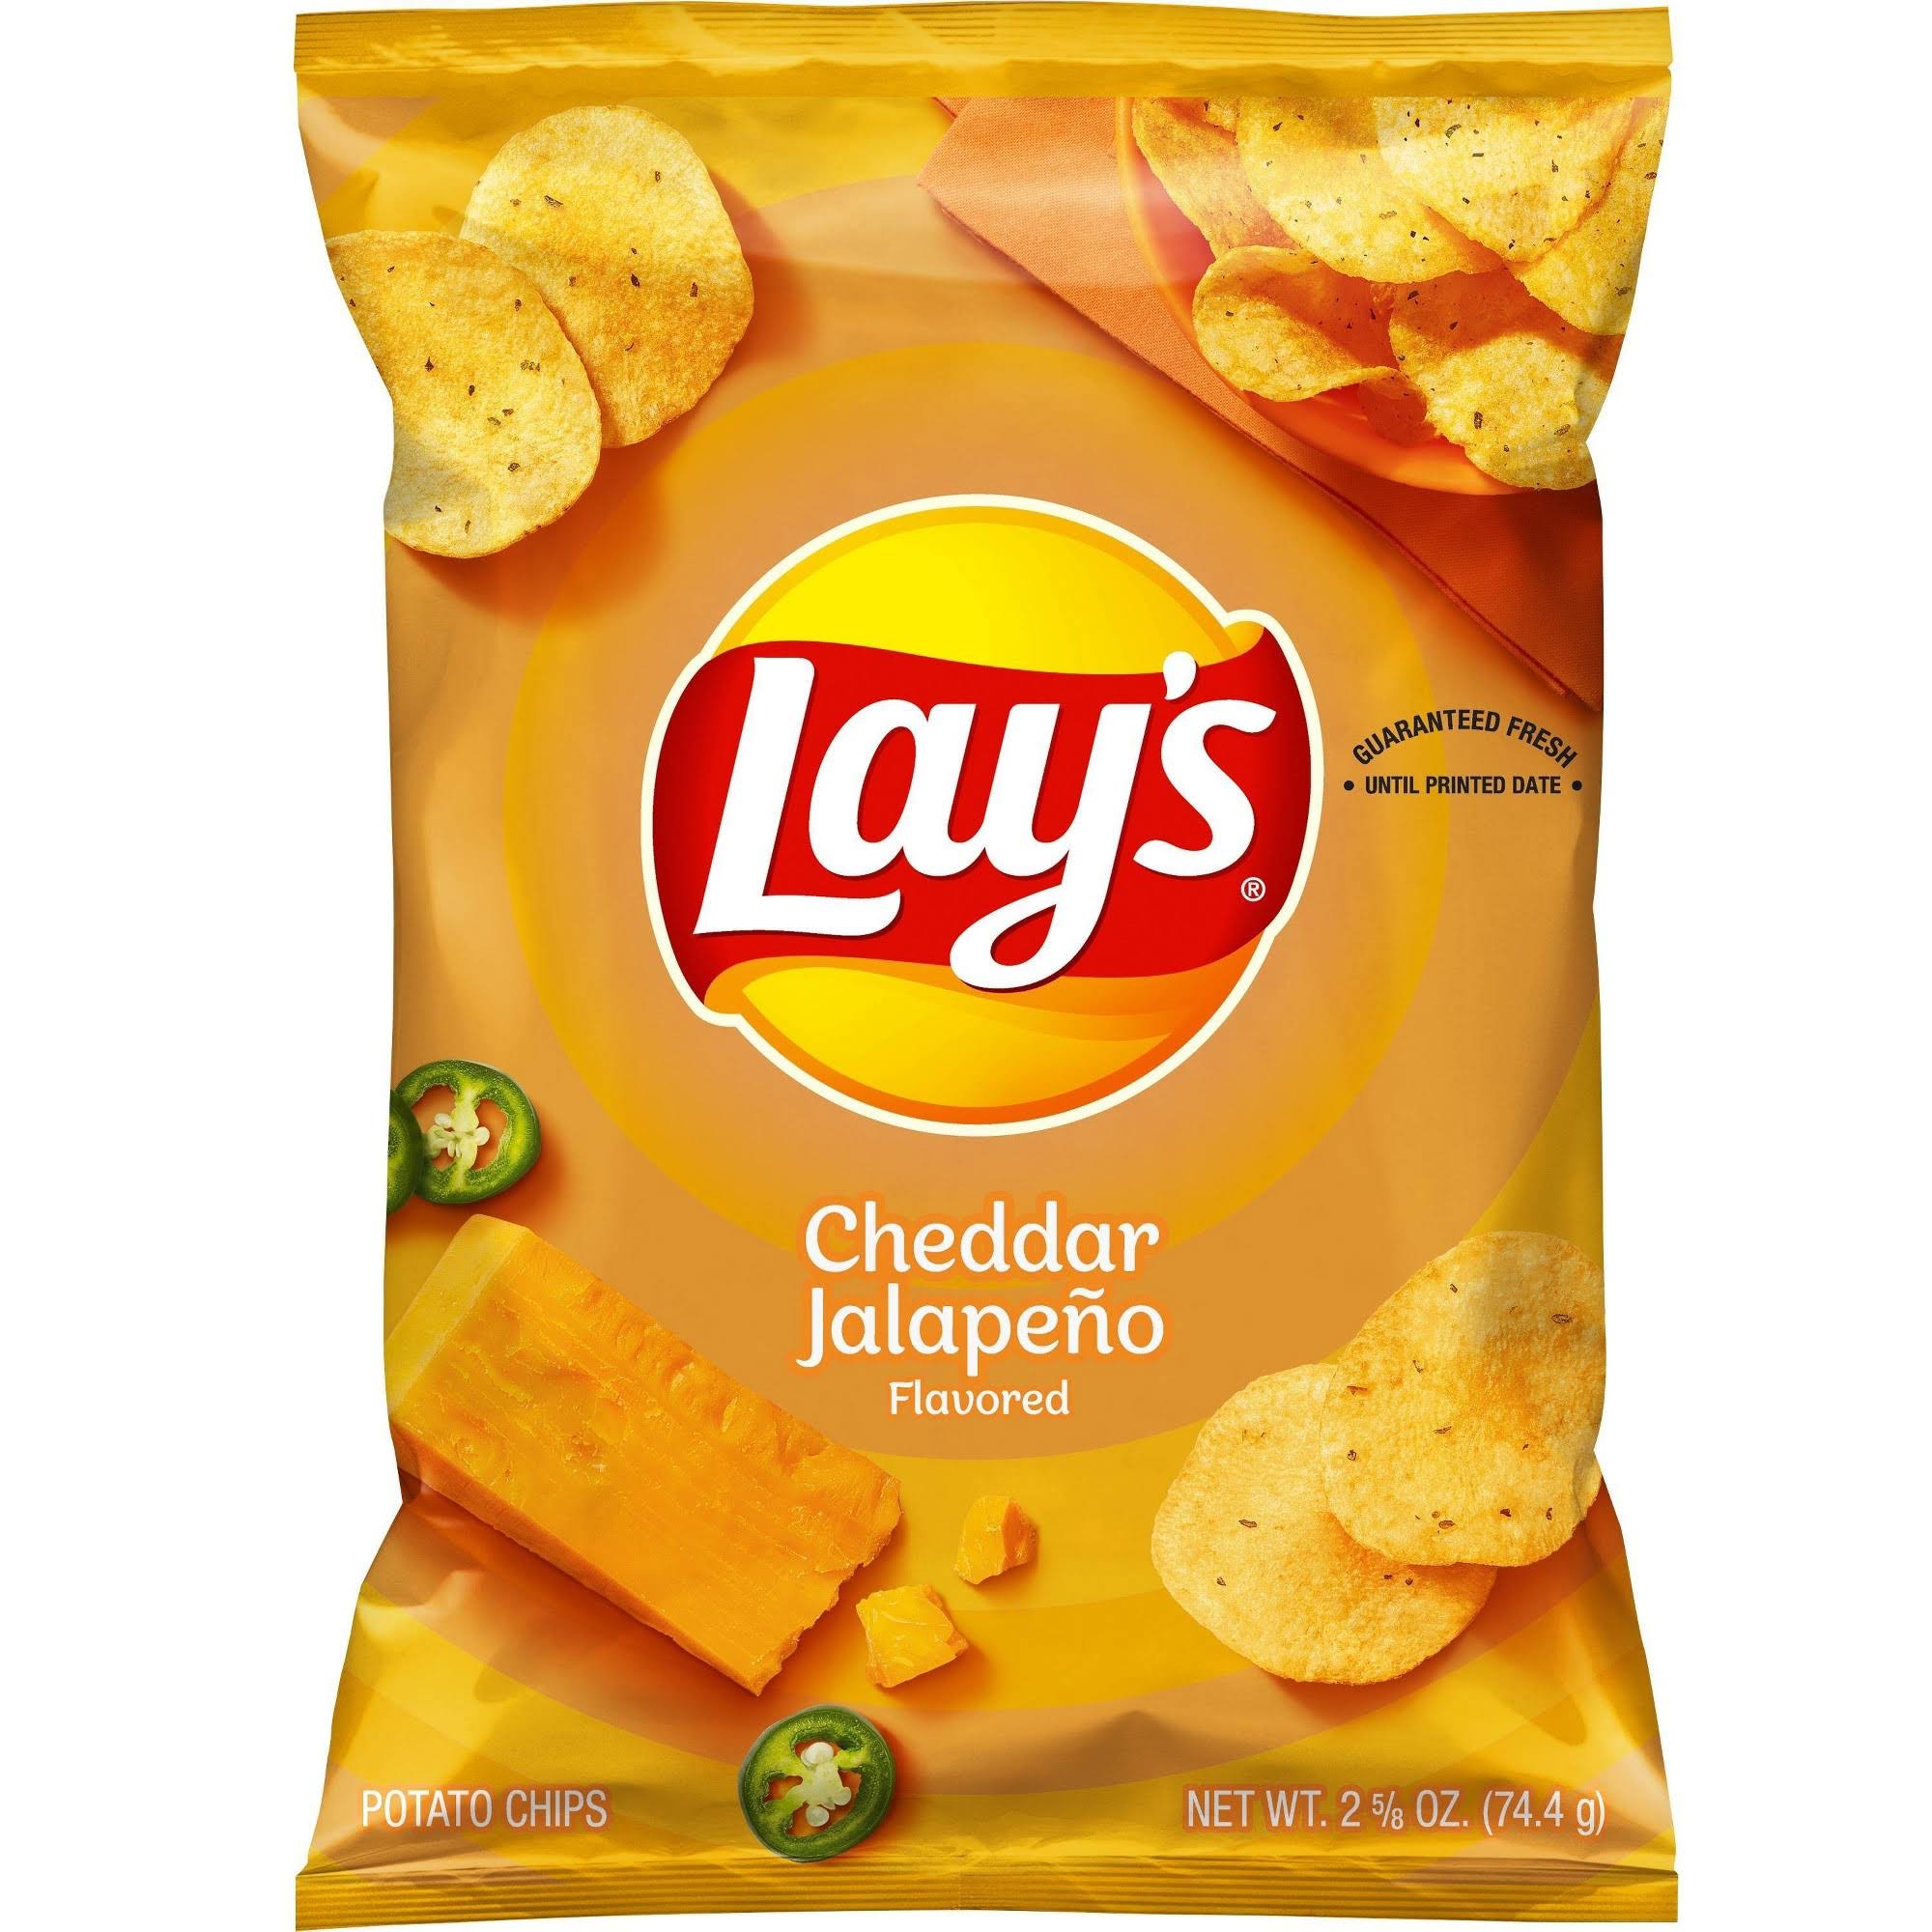 Lay's Potato Chips, Cheddar Jalapeno Flavored - 2.625 oz